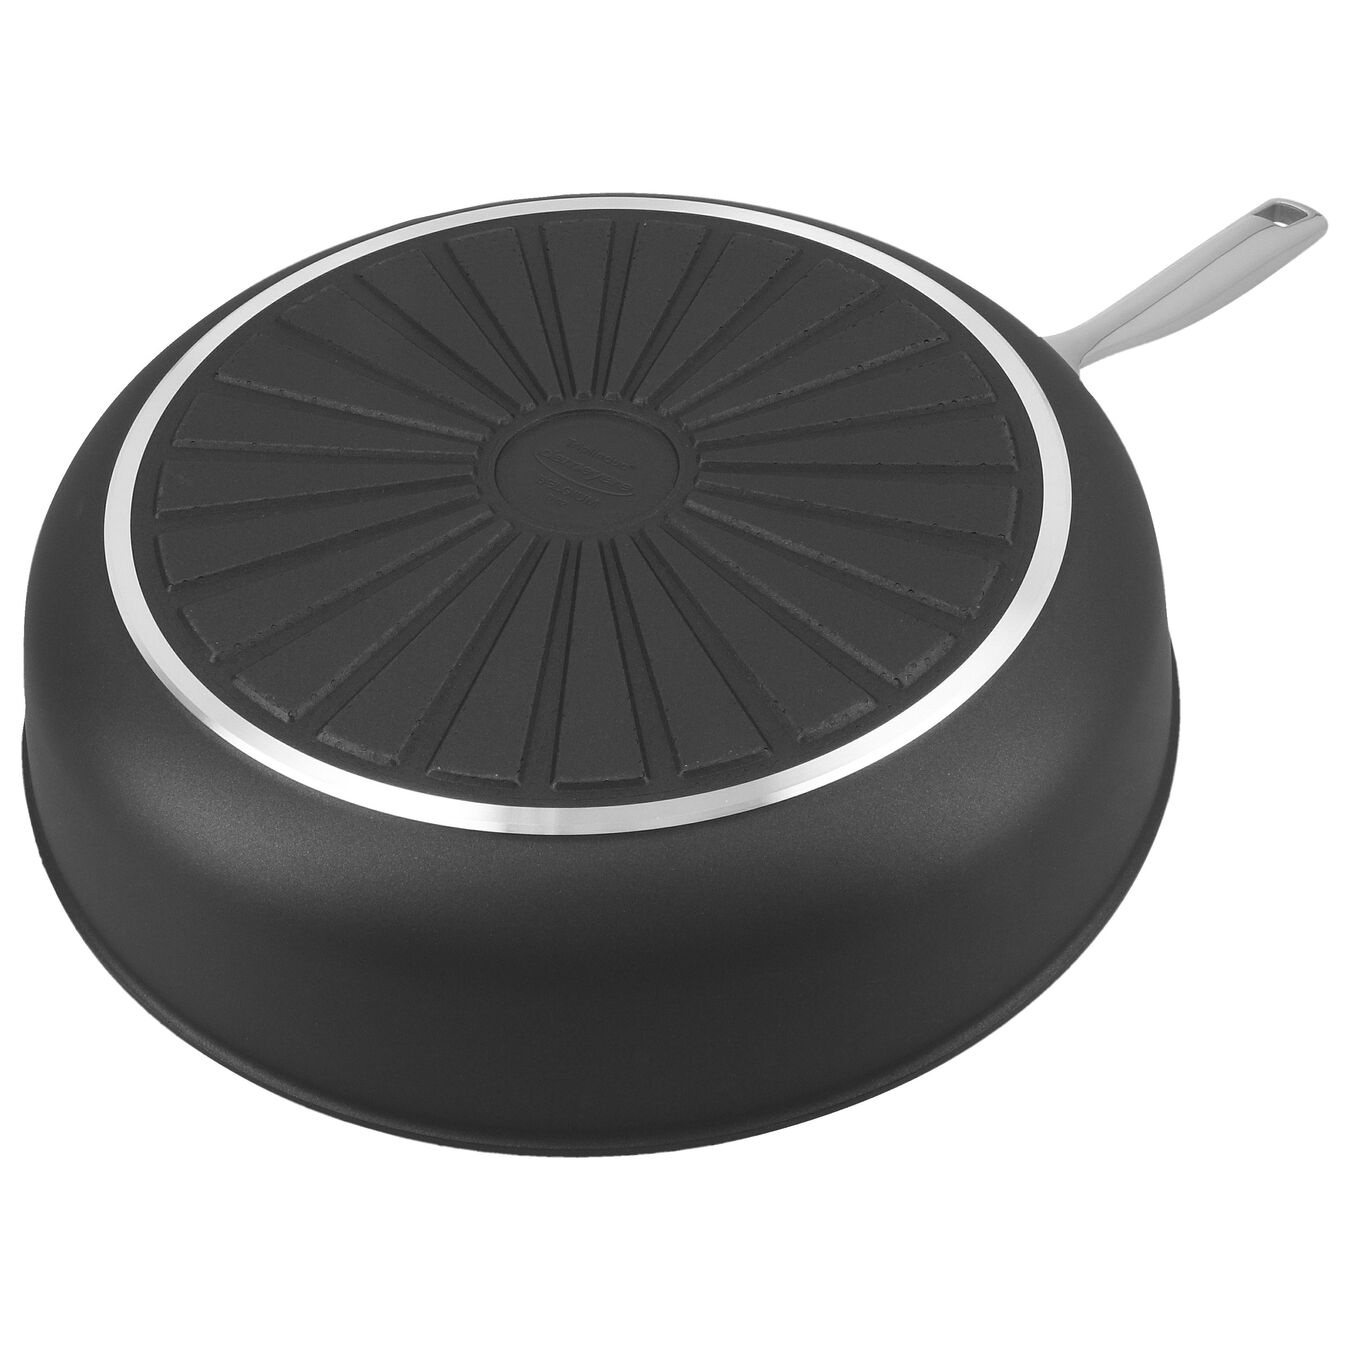 28 cm Aluminum Frying pan high-sided silver-black,,large 2